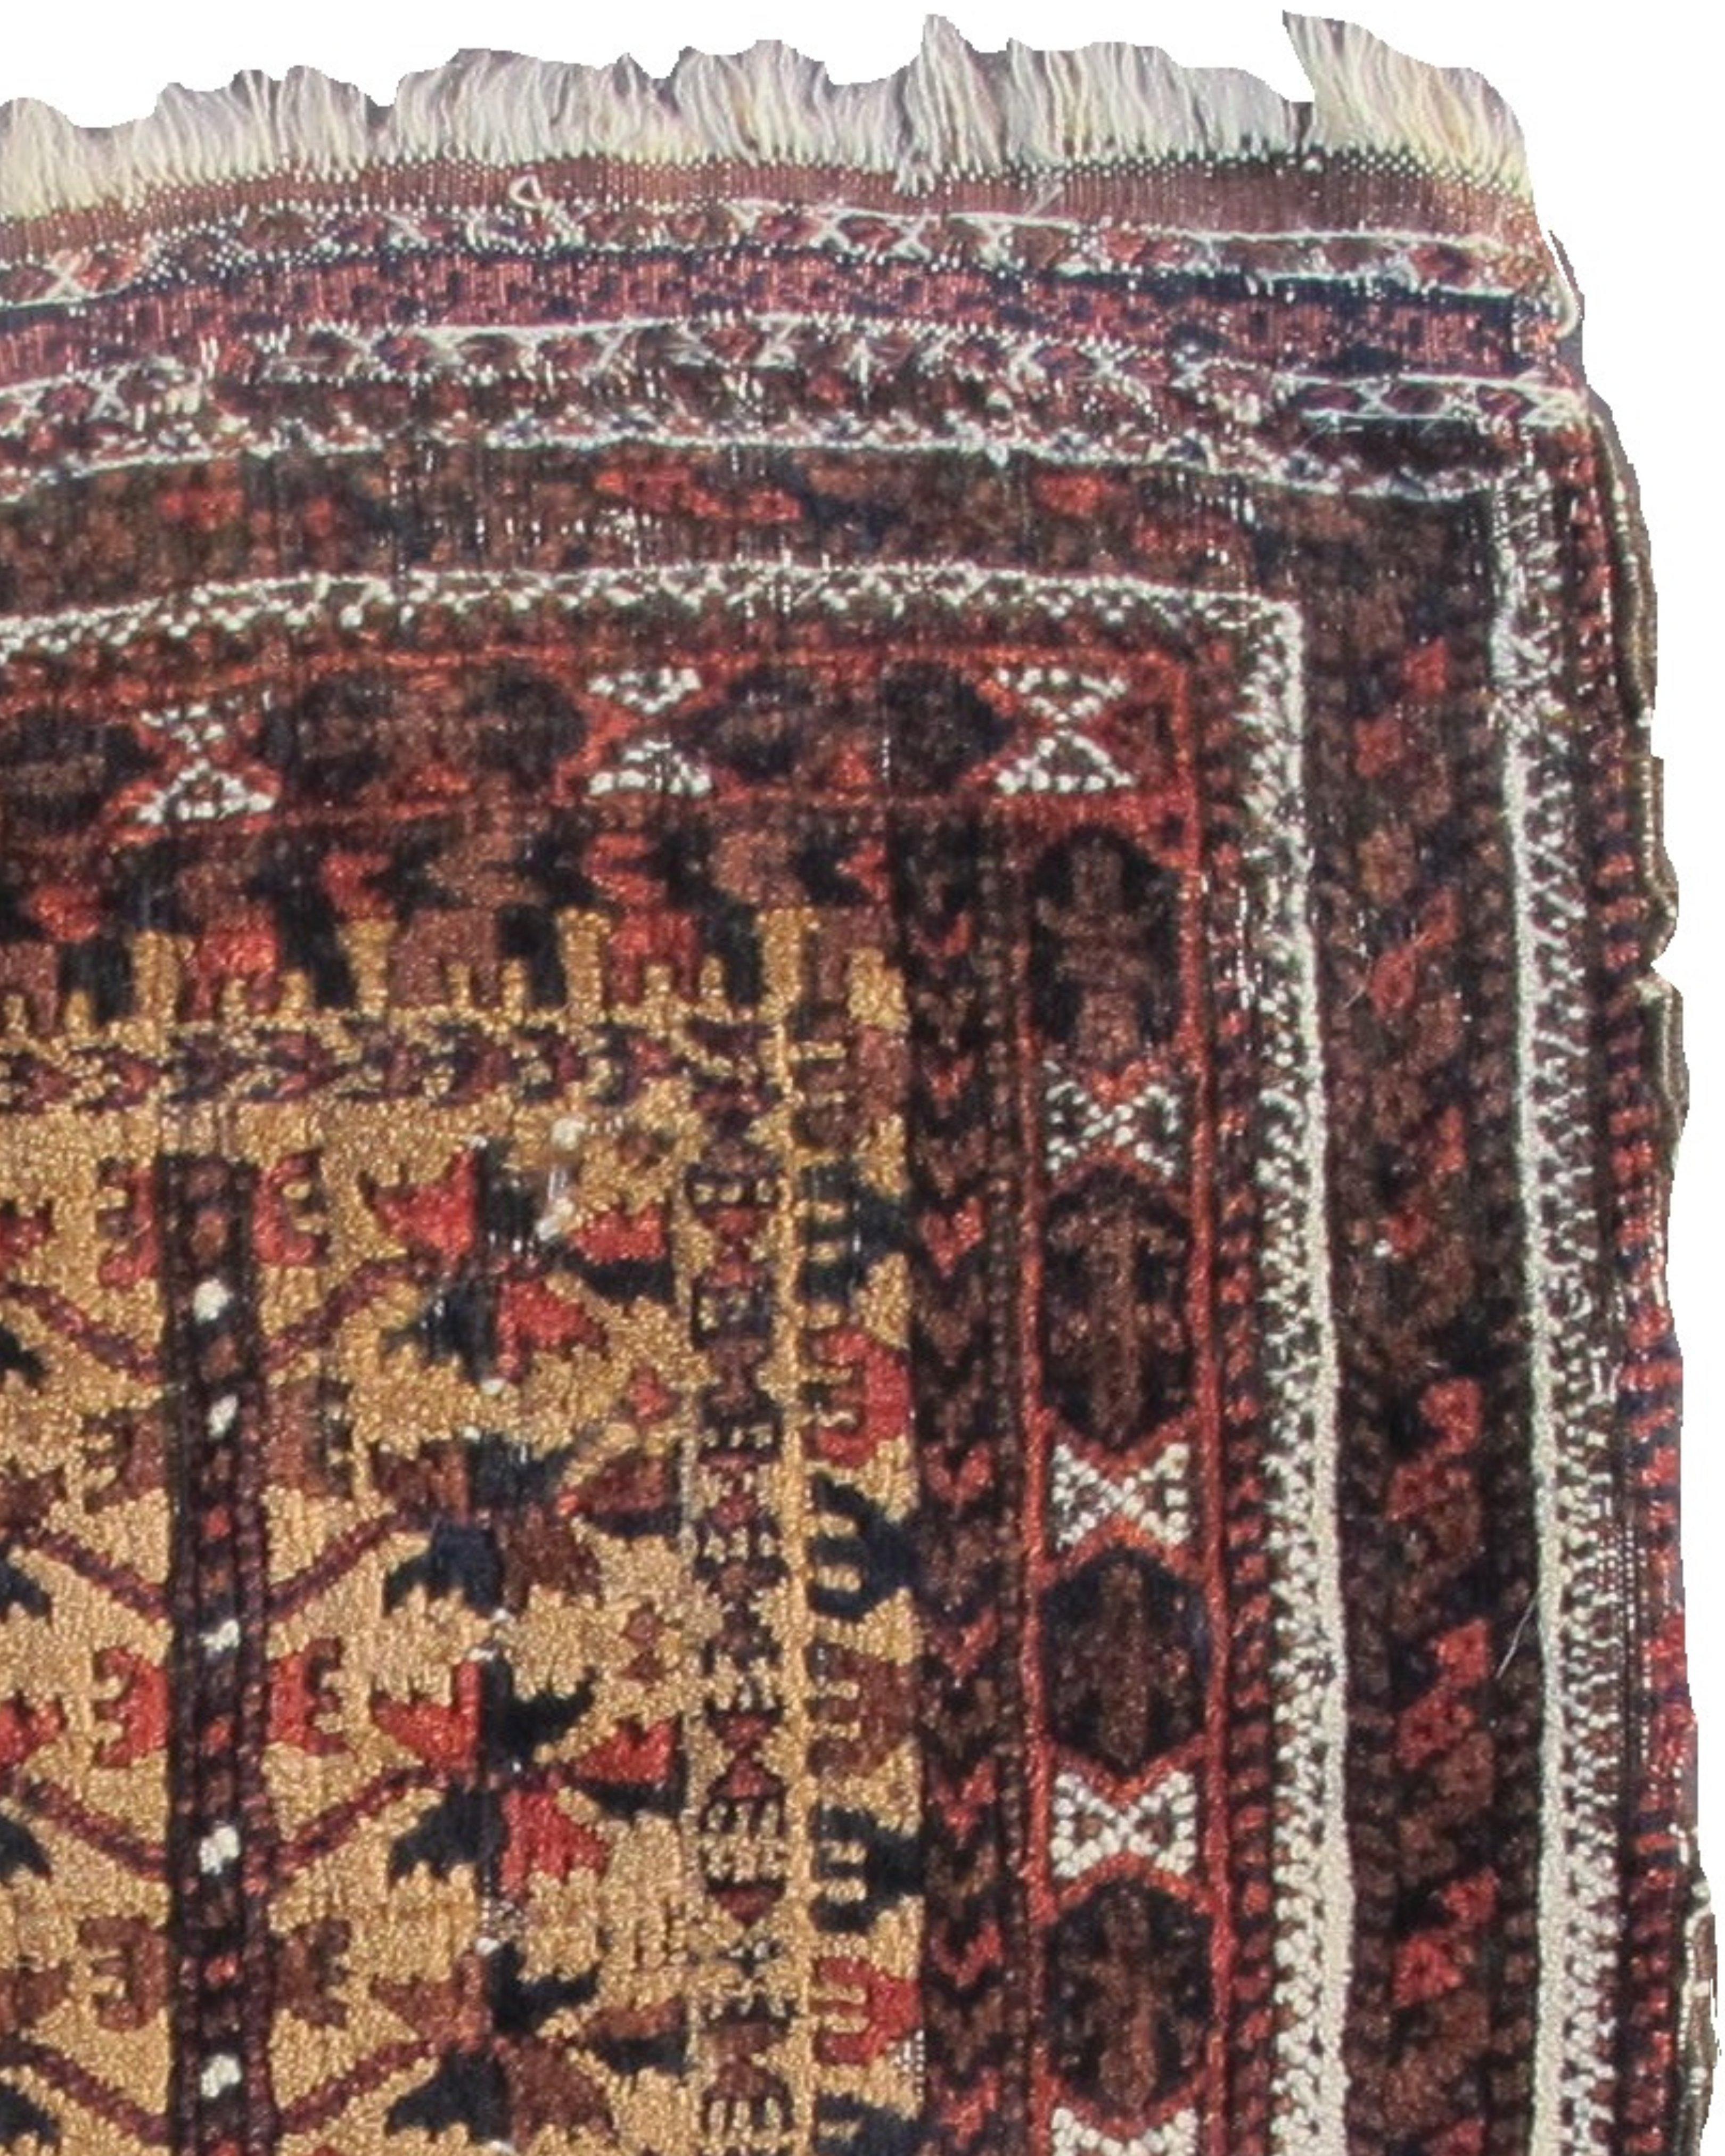 Antique Persian Baluch Balisht Rug, Late 19th Century

Additional information: 
Dimension: 1'7